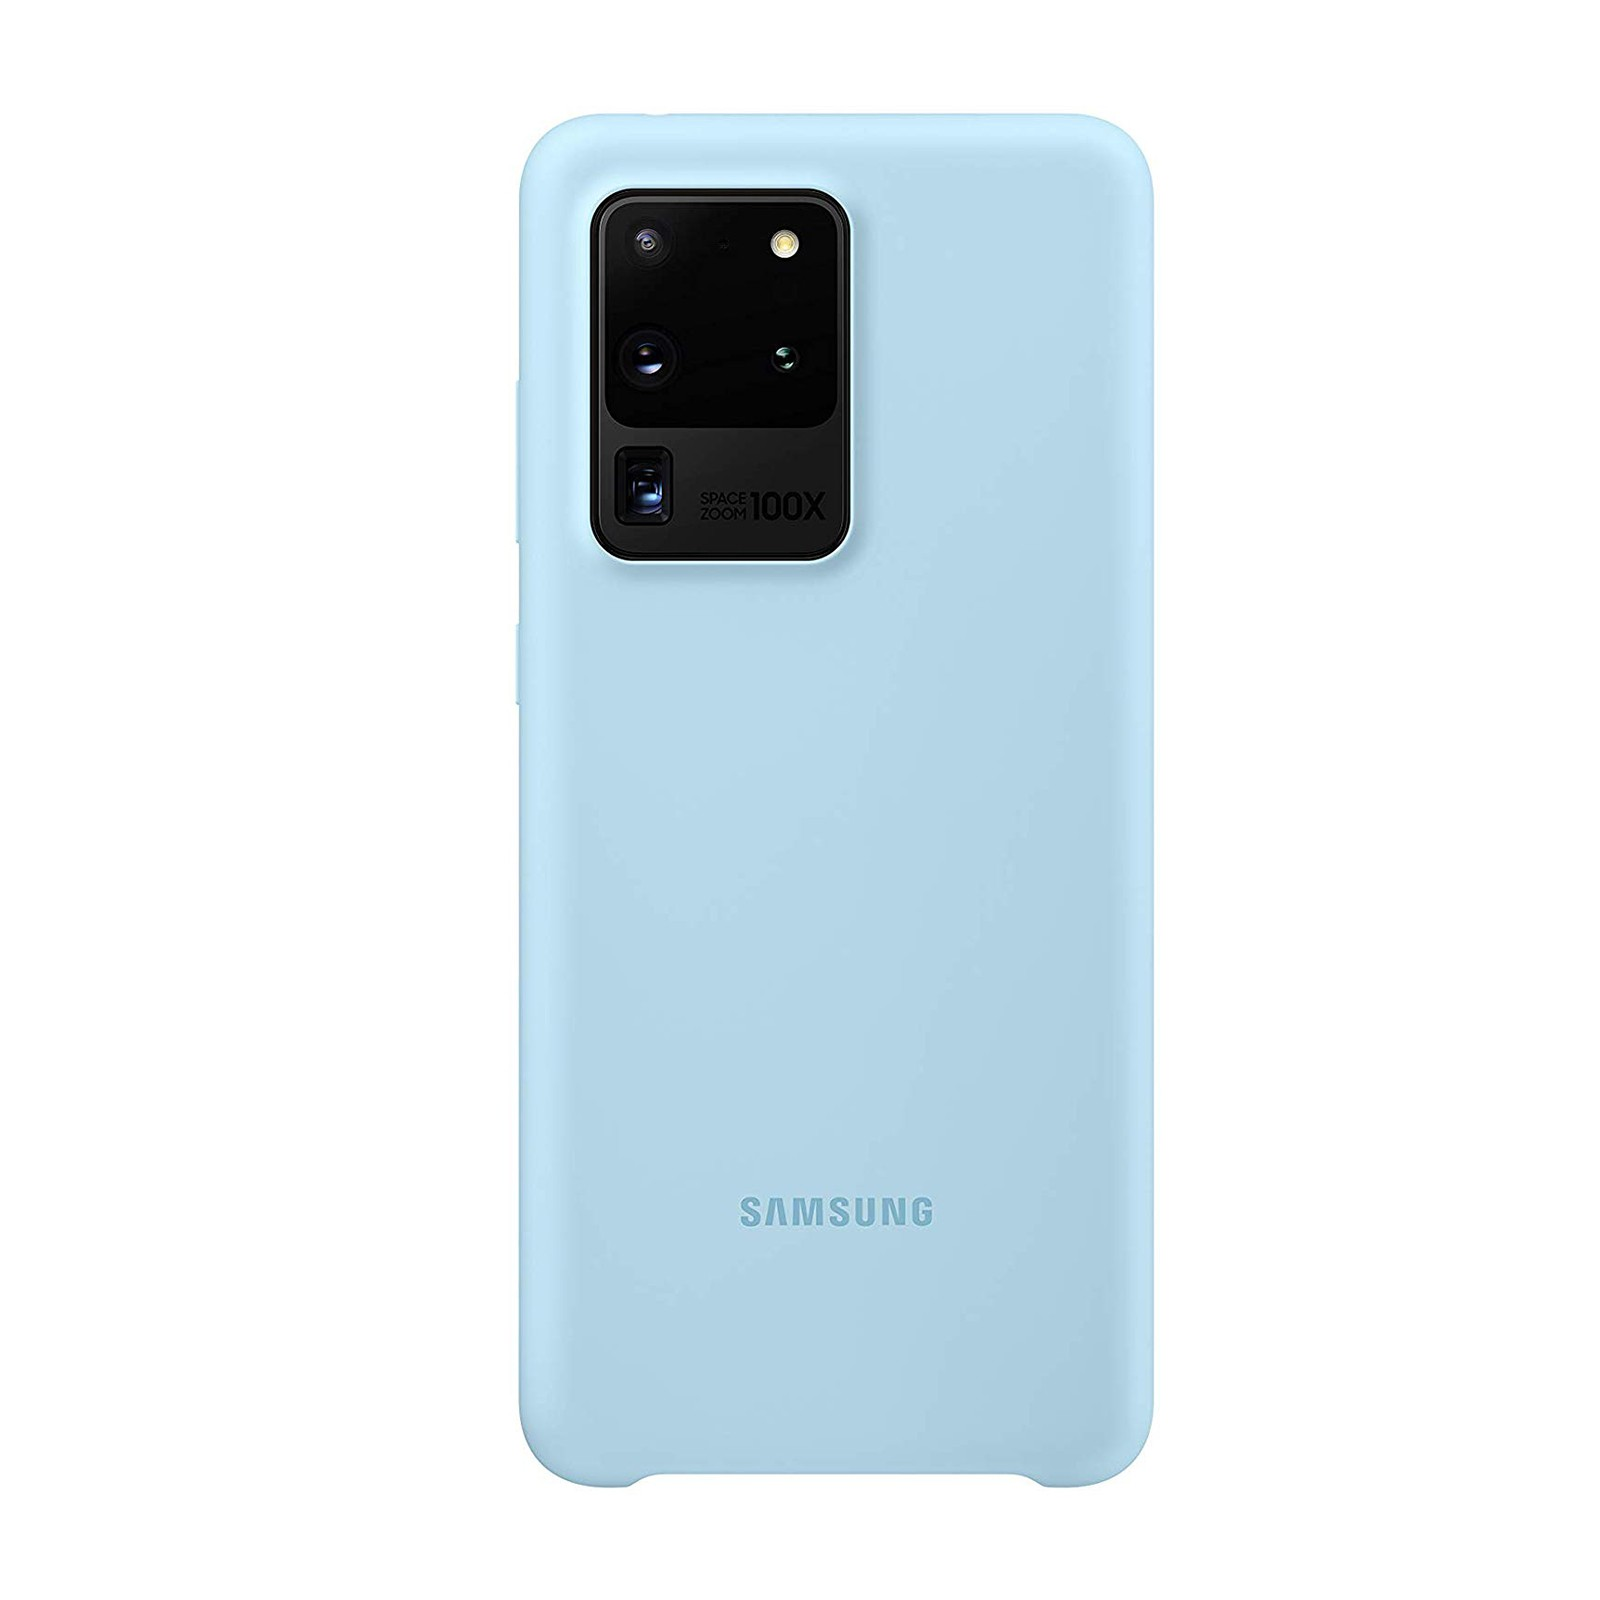 SAMSUNG EF-PG988 SILICONE COVER GALAXY Backcover, Blue S20 Sky ULTRA Ultra, BLUE, SKY S20 Samsung, Galaxy